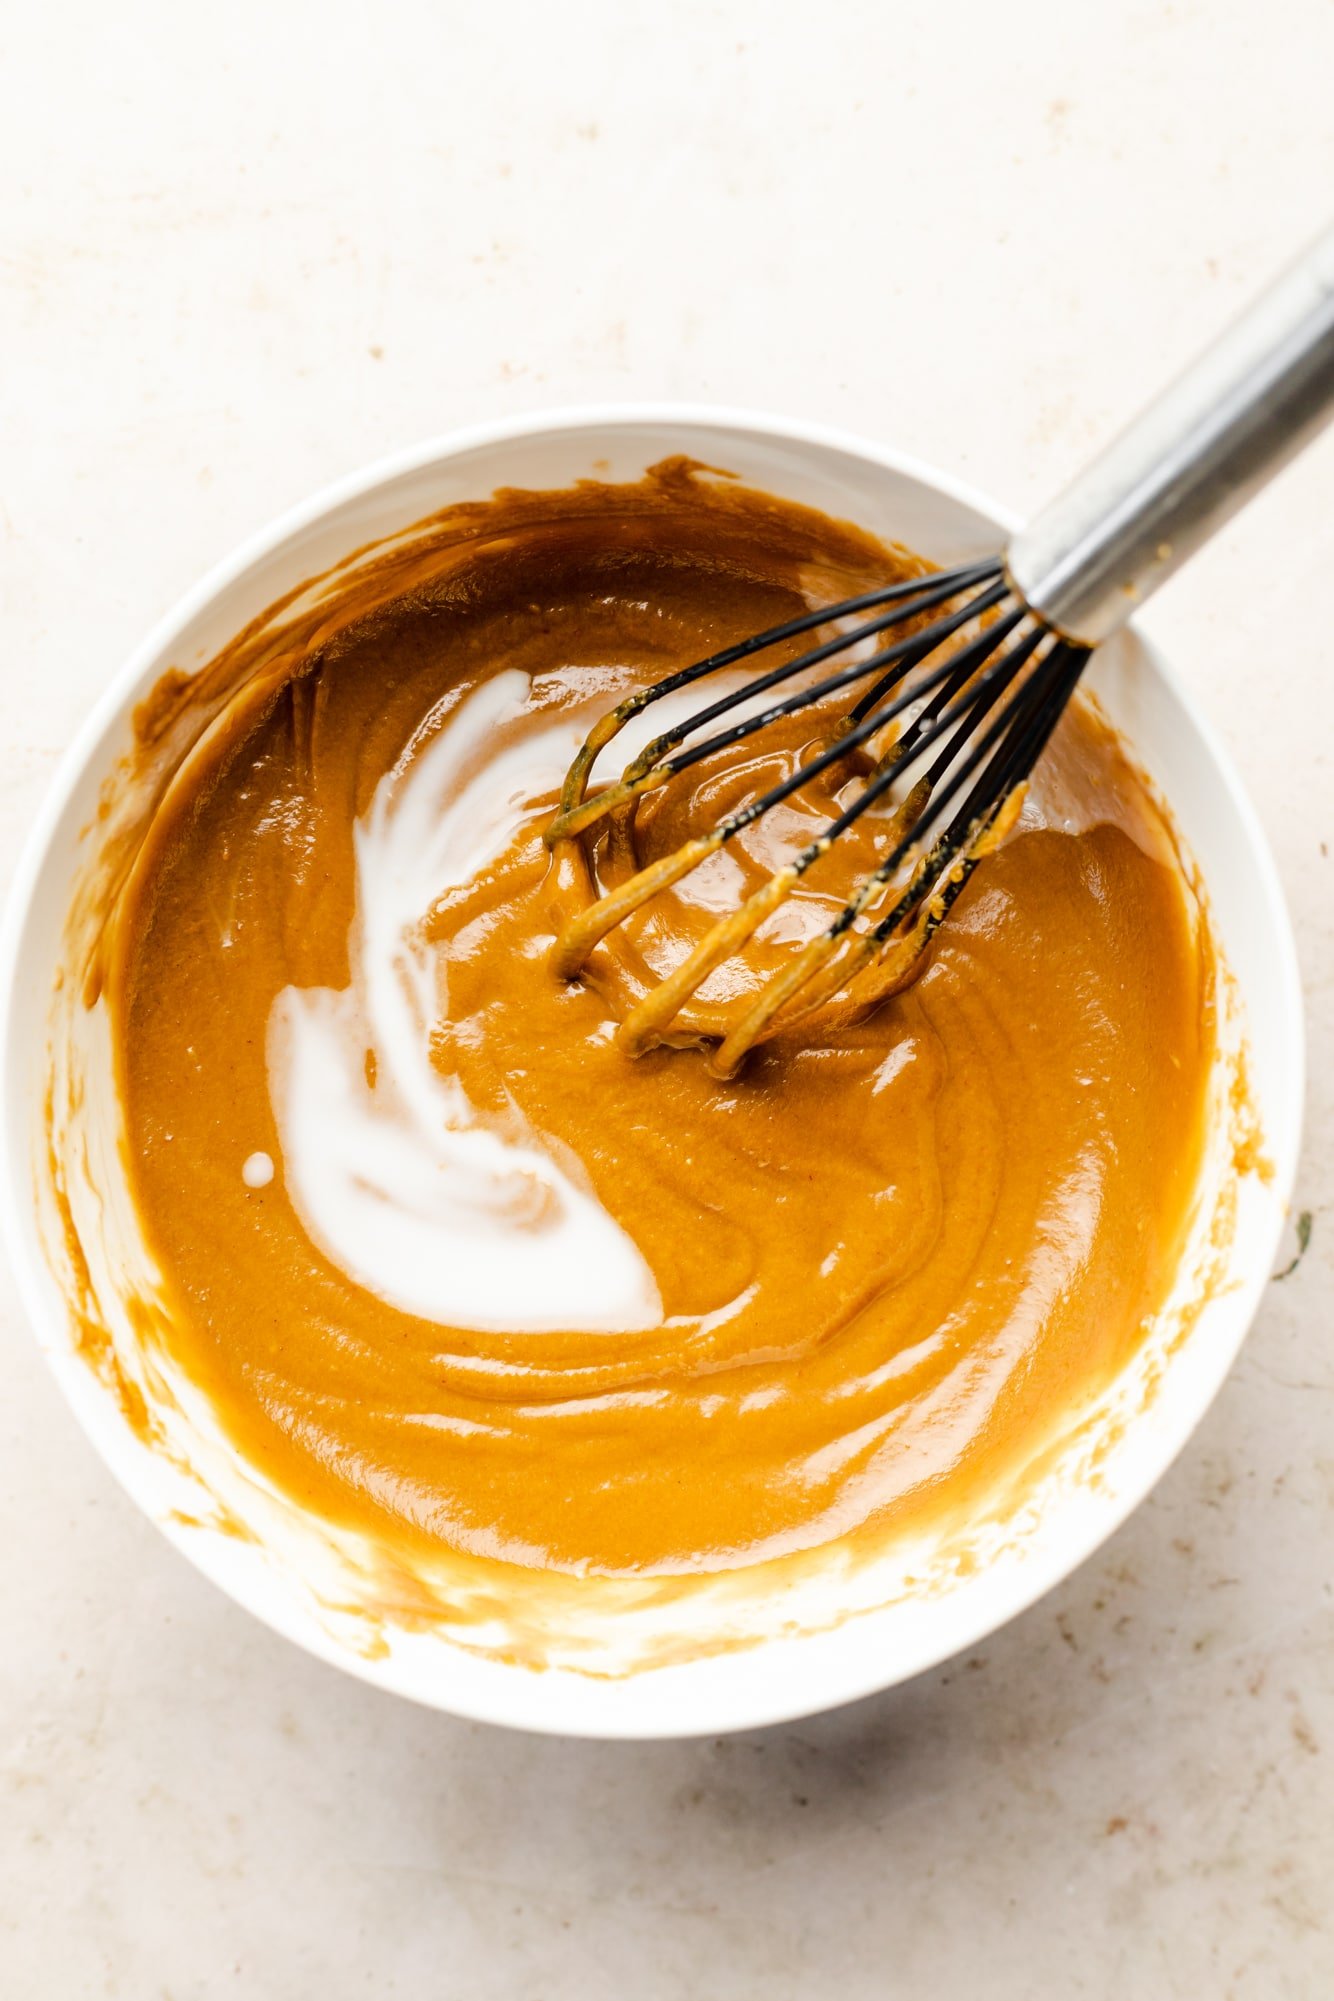 Use a whisk to stir the coconut milk into a bowl of peanut sauce.